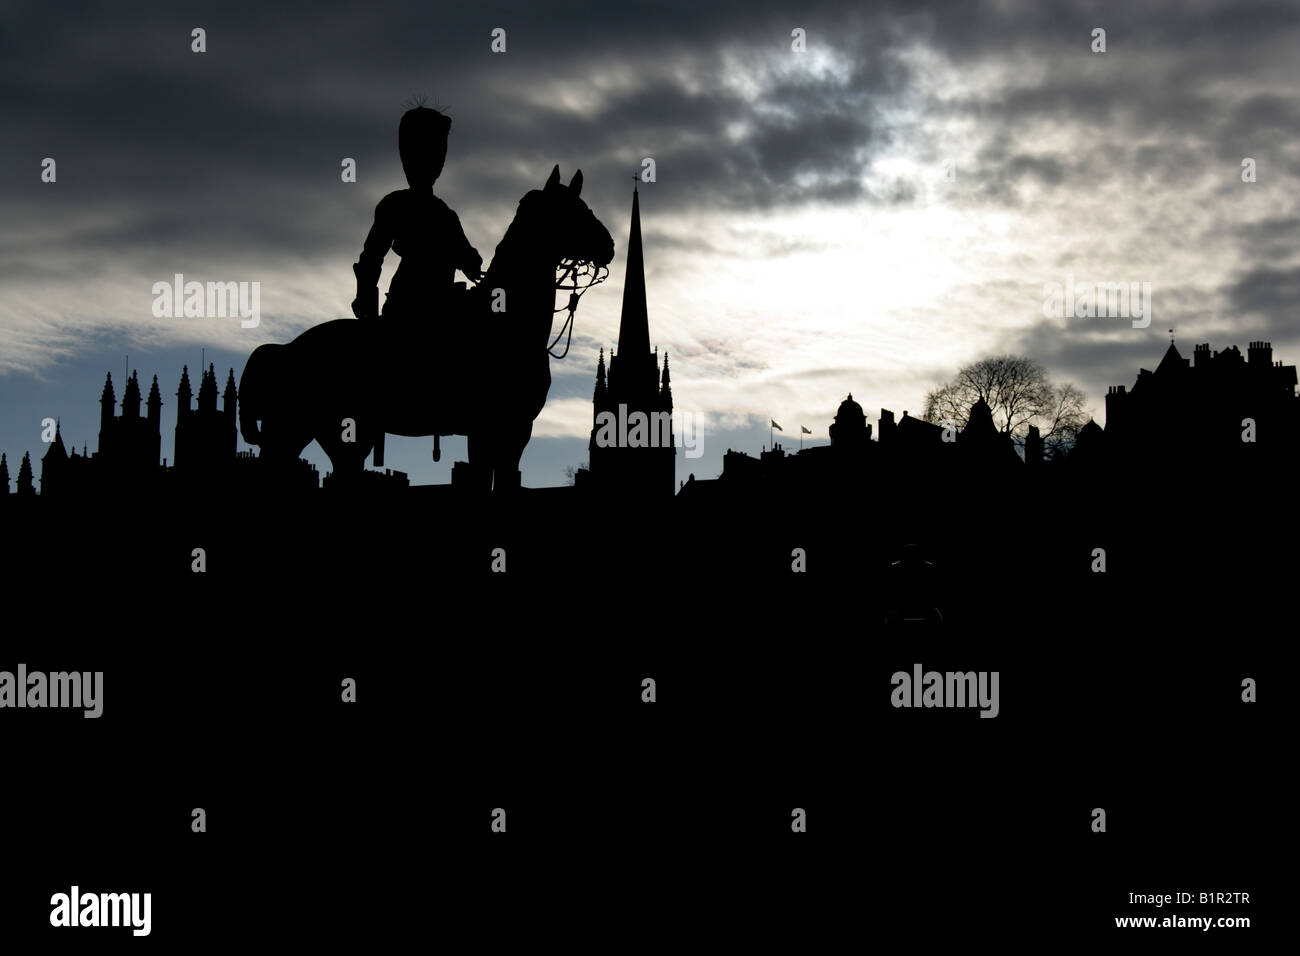 City of Edinburgh, Scotland. Silhouetted view of the Royal Scots Greys Boer War memorial equestrian statue, in Princes Street. Stock Photo